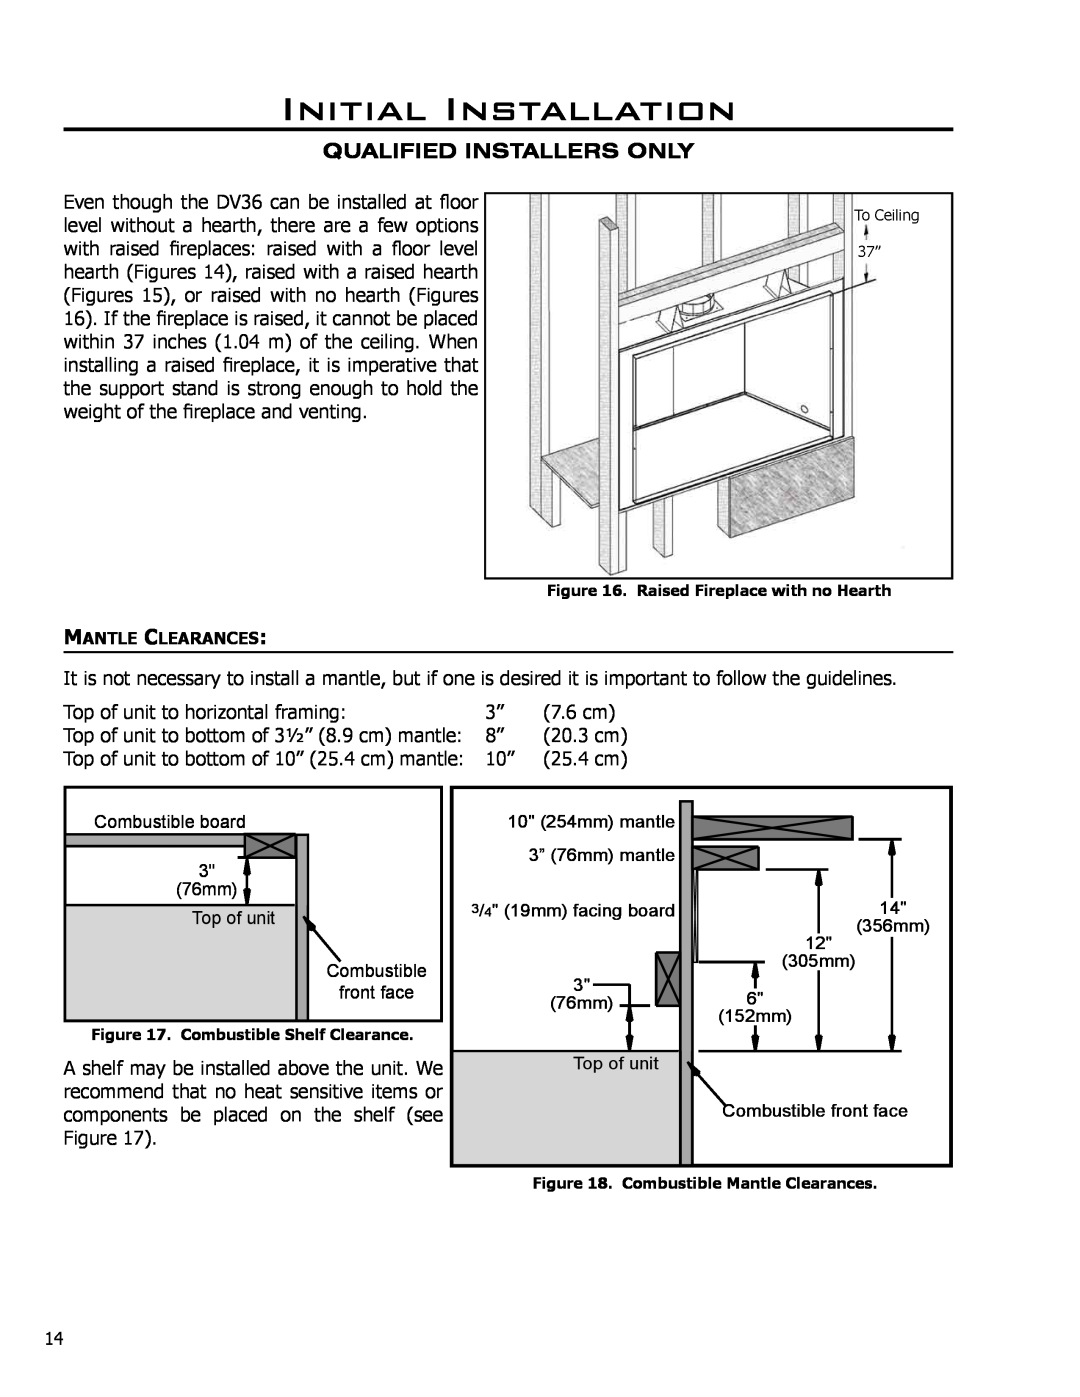 Enviro C-10791, 50-927 owner manual Initial Installation, Qualified Installers Only, Top of unit to horizontal framing 